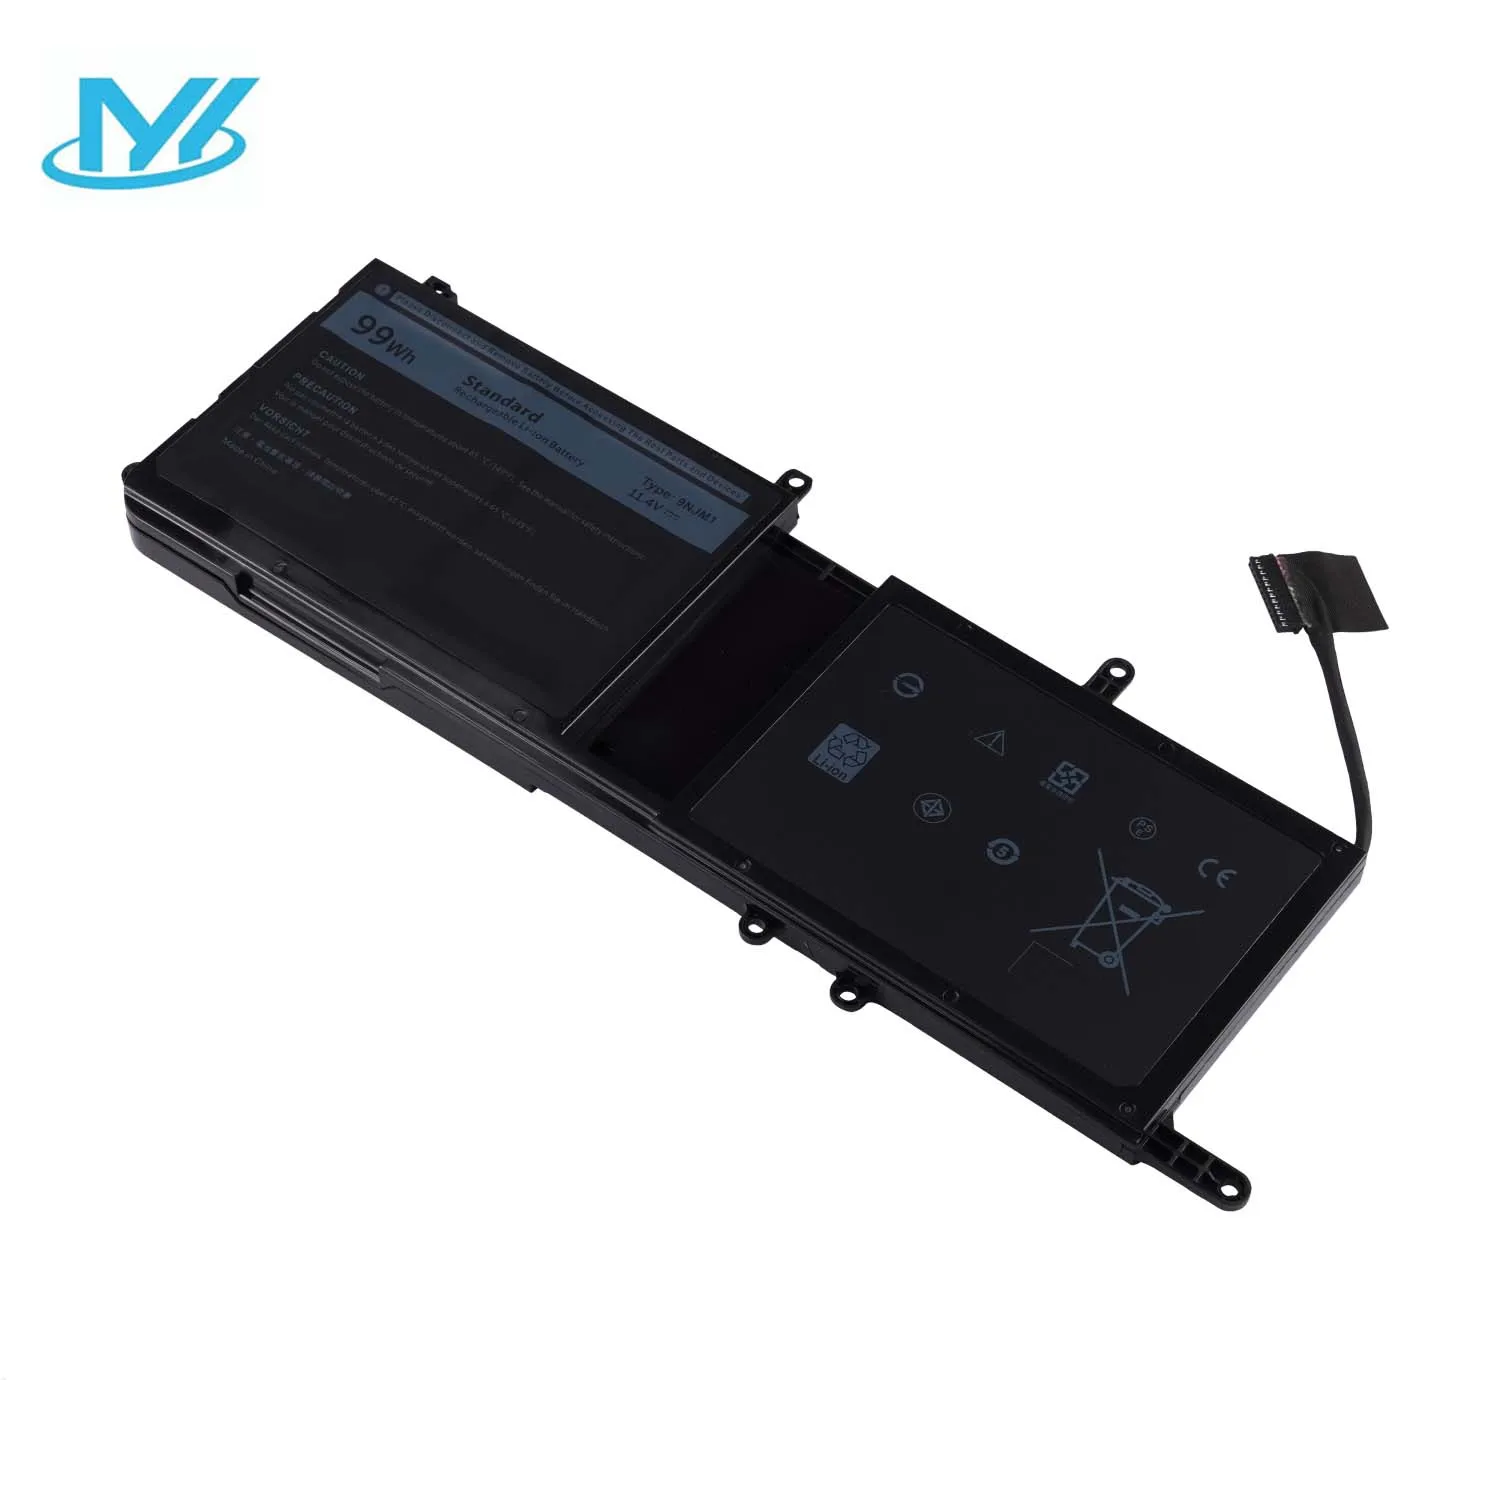 

9NJM1 Laptop Battery for Dell Alienware 15 R3 R4 17 R4 R5 P31E001 ALW17C-D1738 Notebook 0546FF 0HF250 44T2R HF250 MG2YH